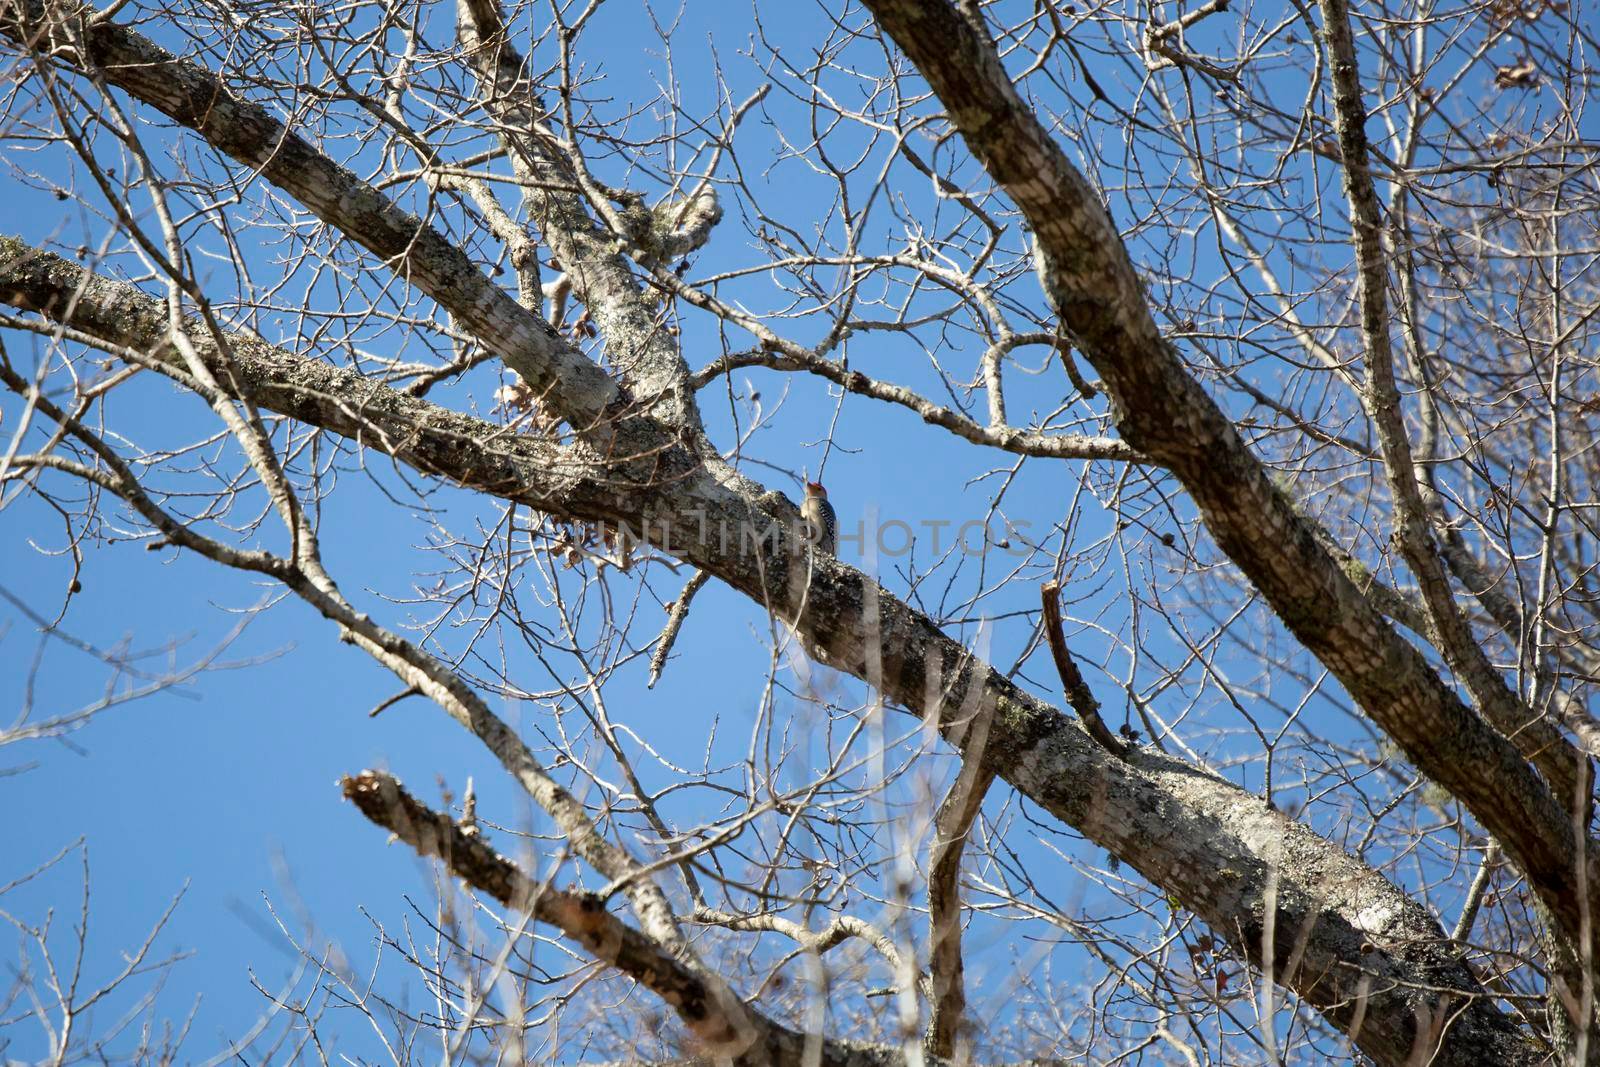 Red-bellied woodpecker (Melanerpes carolinus) looking out majestically from a tree branch